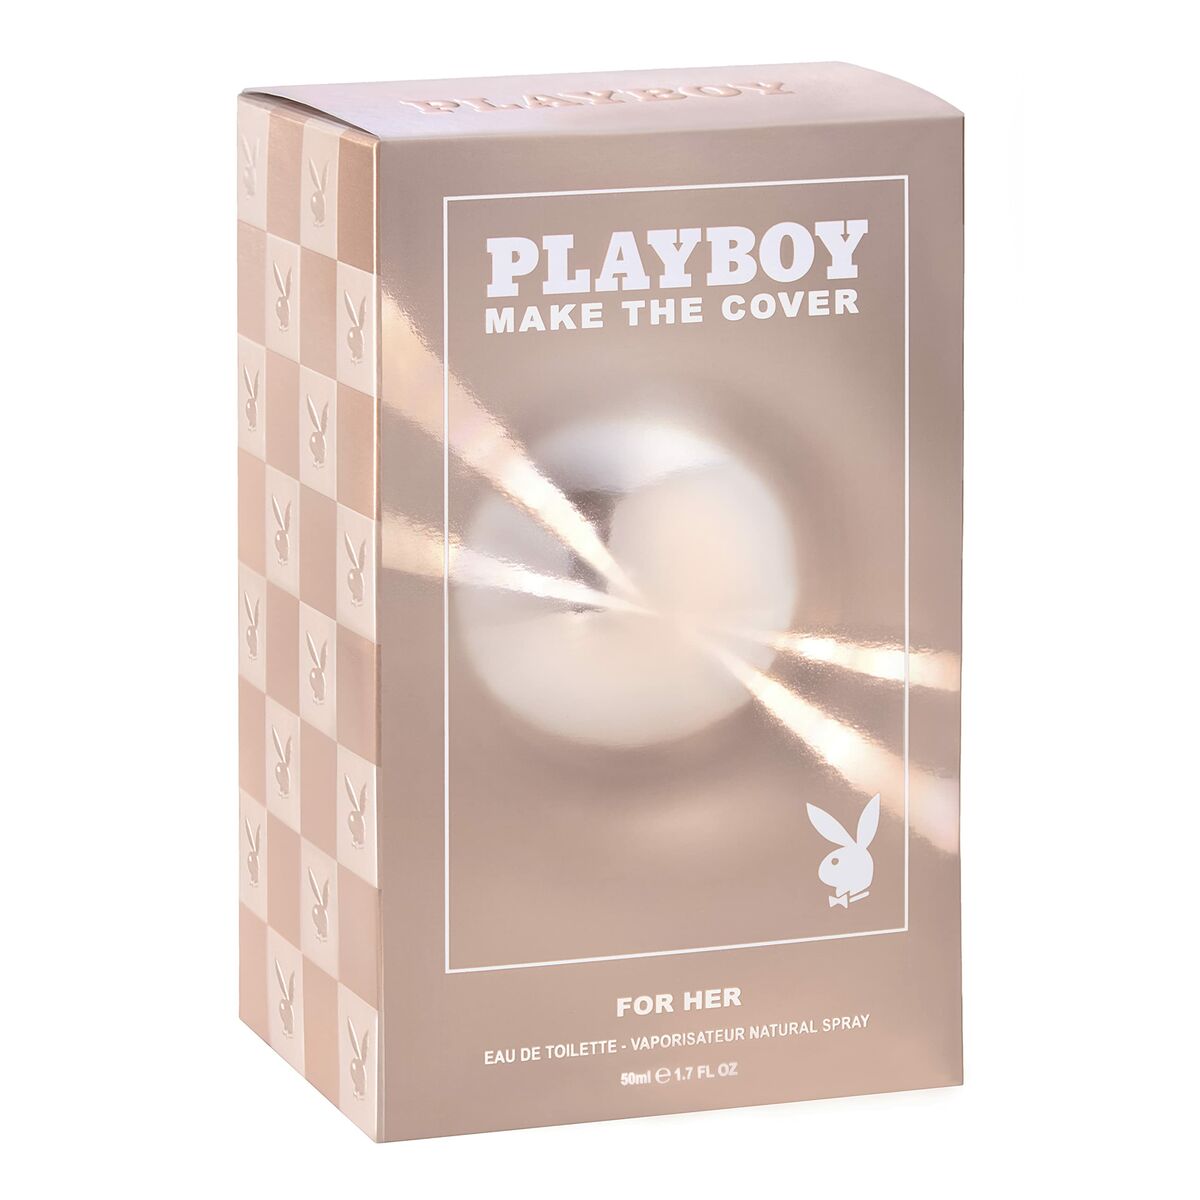 Perfume Mulher Playboy EDT 50 ml Make The Cover